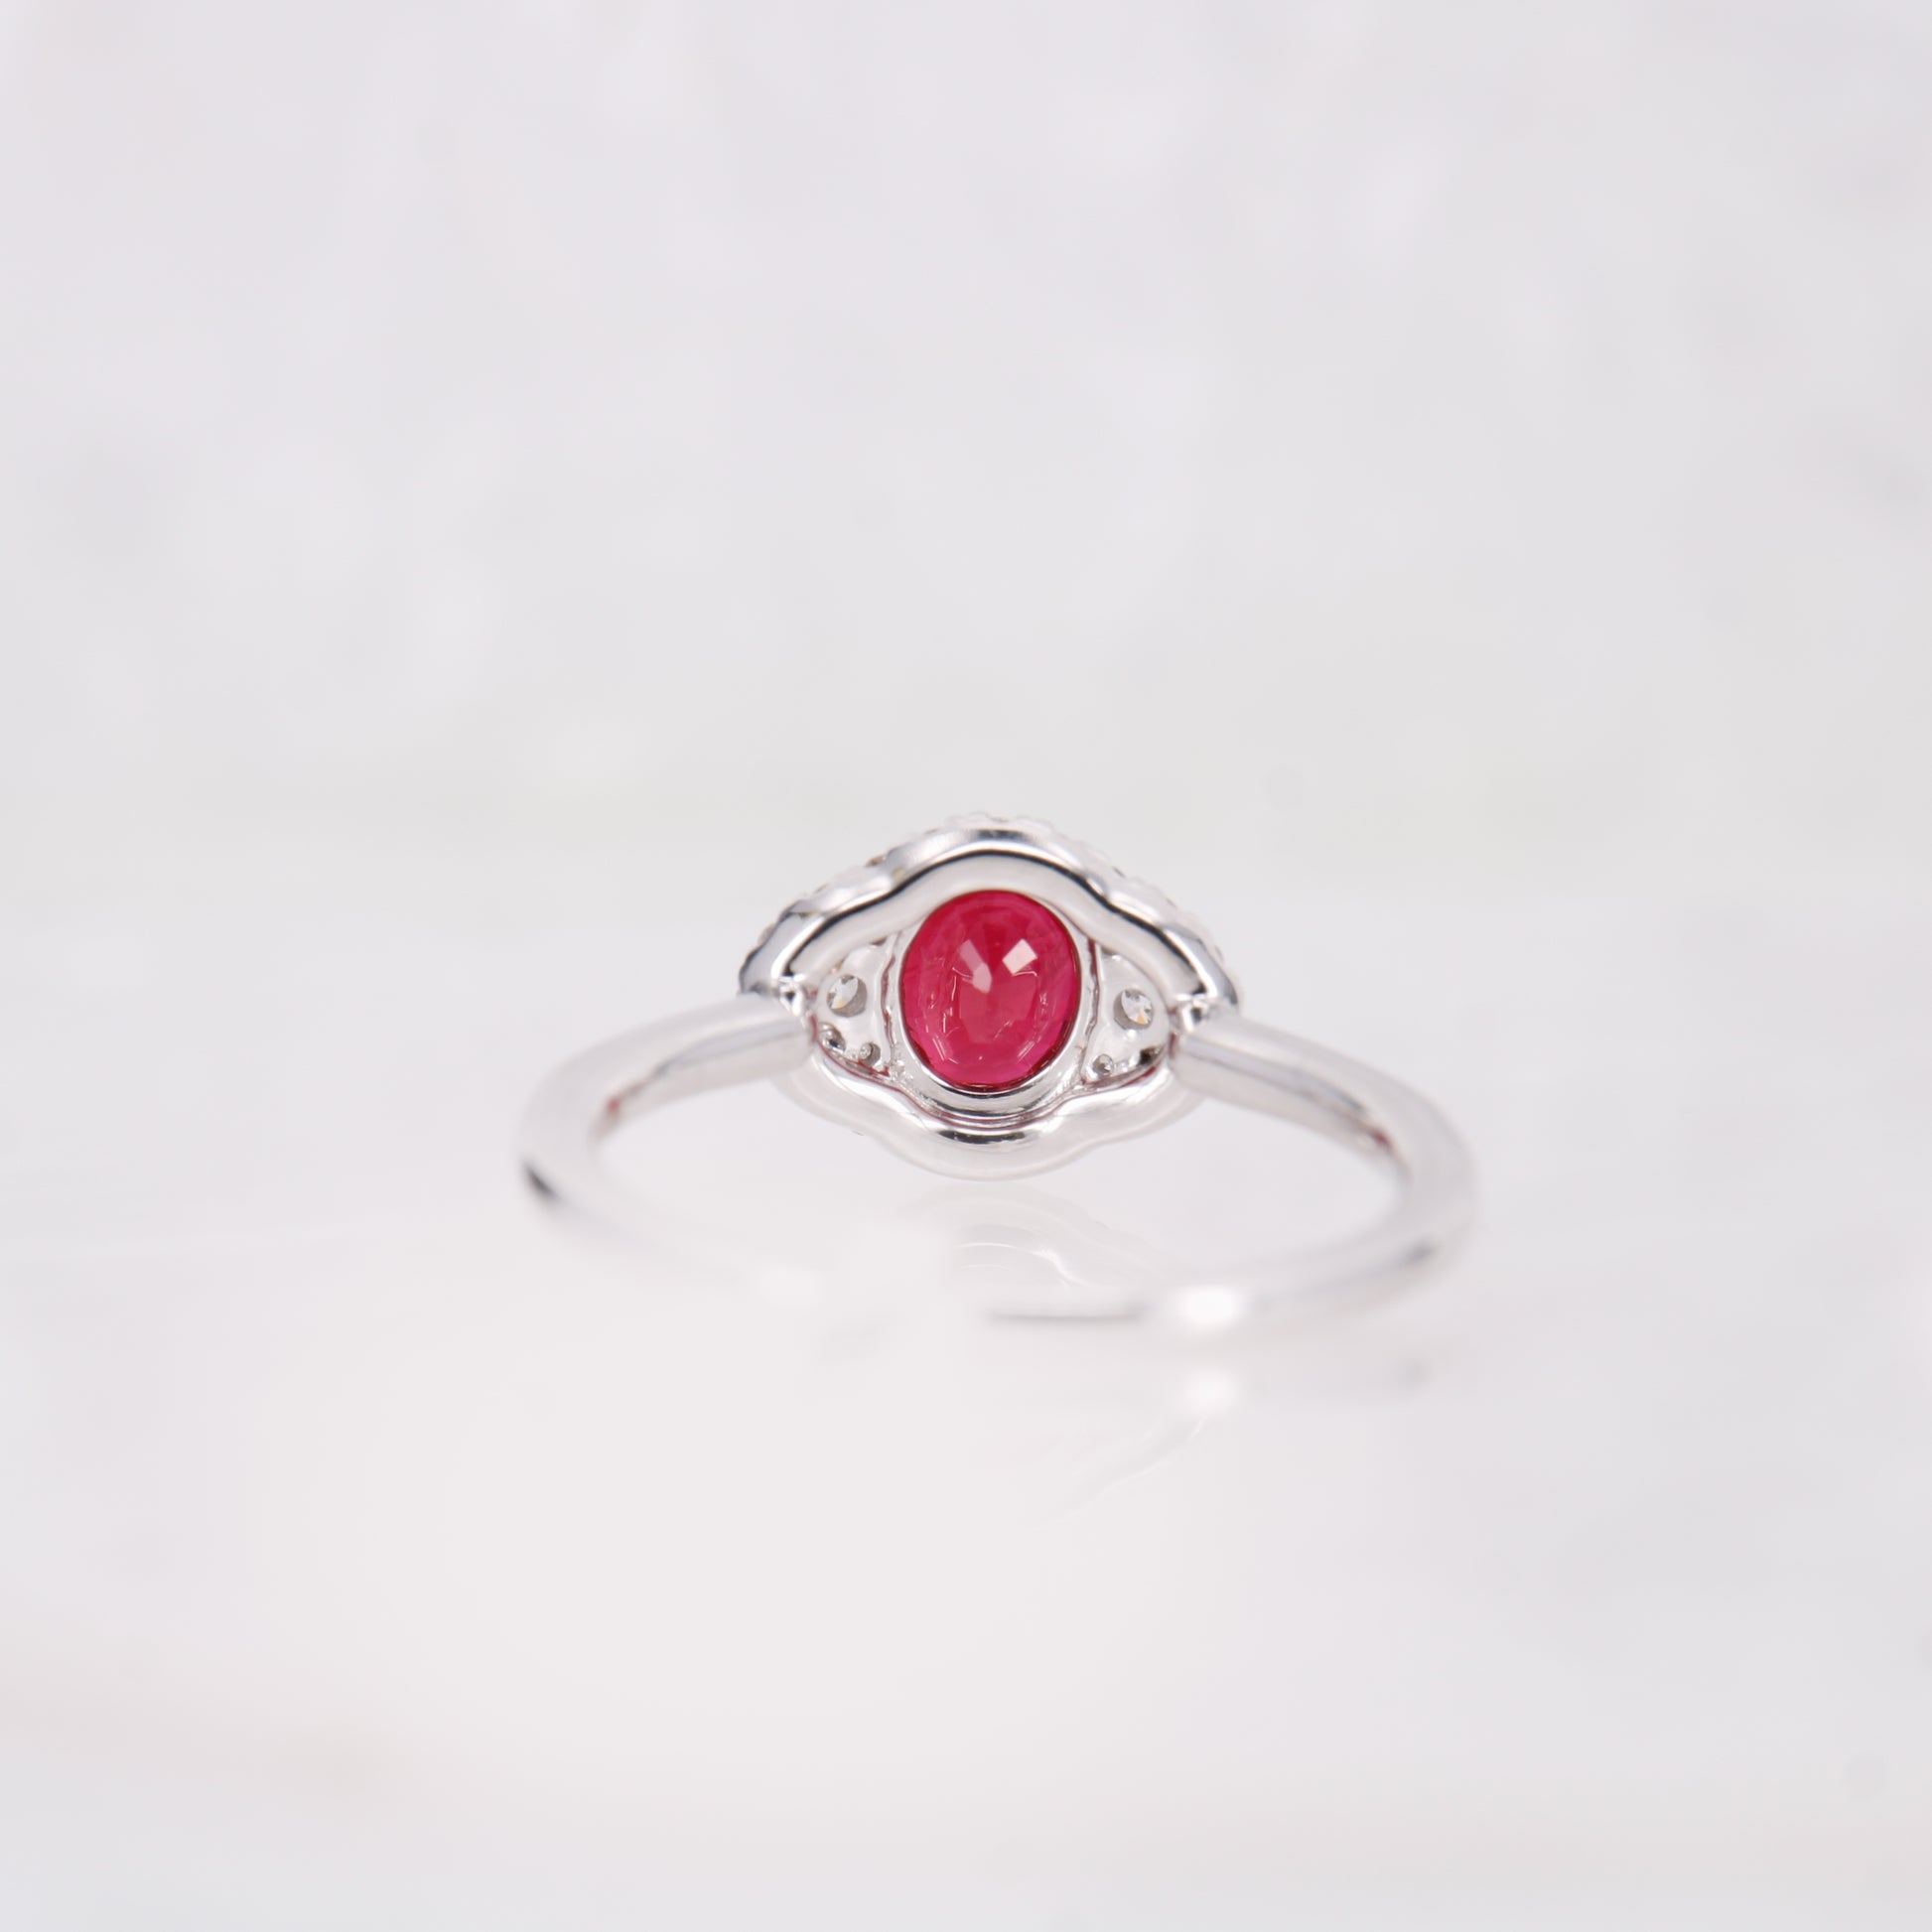 18ct White Gold oval cut Ruby and diamond halo ring. 